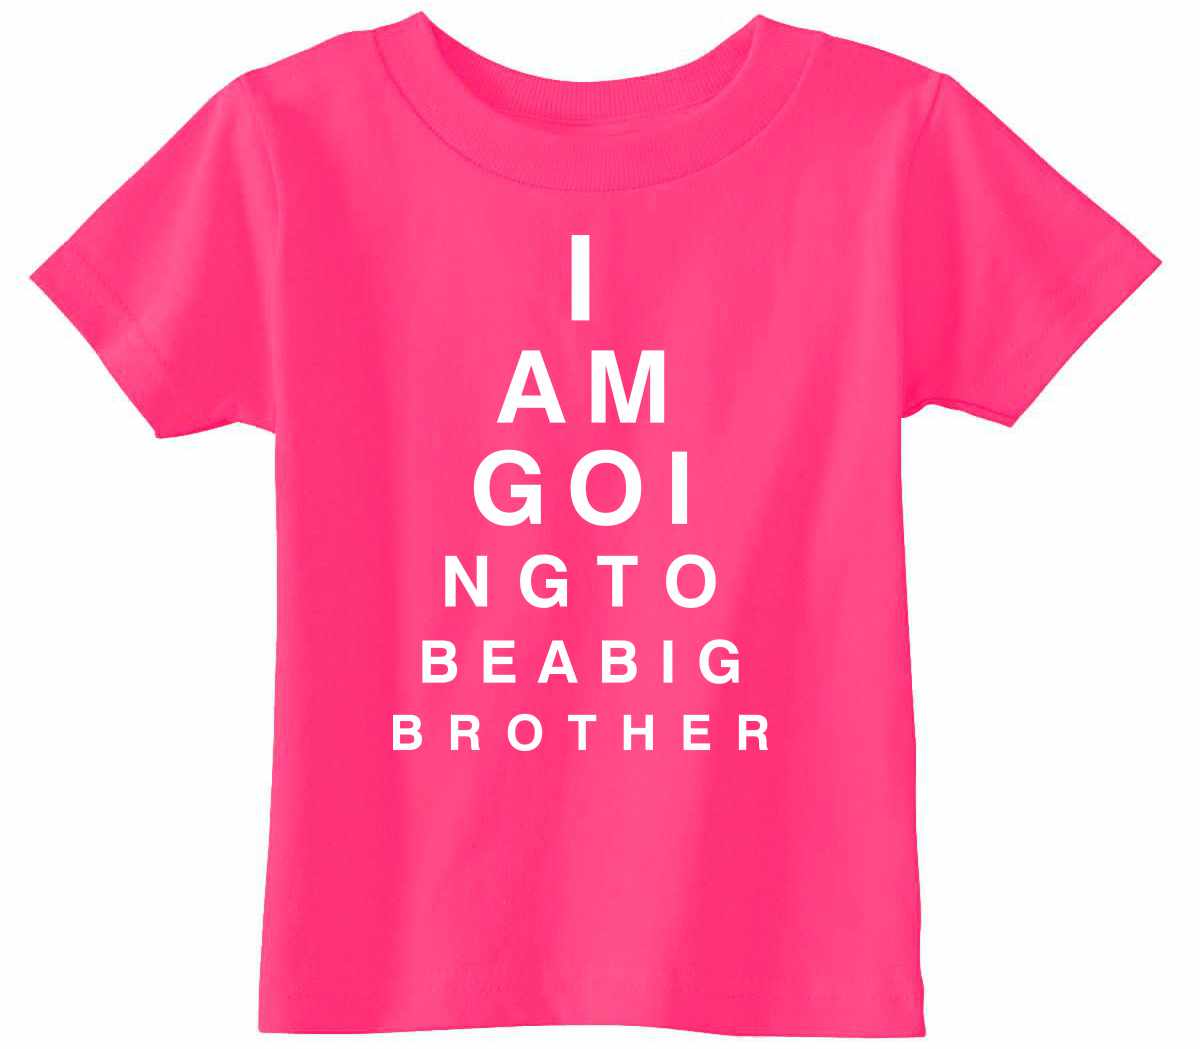 I AM GOING TO BE BIG BROTHER EYE CHART Infant/Toddler  (#1007-7)